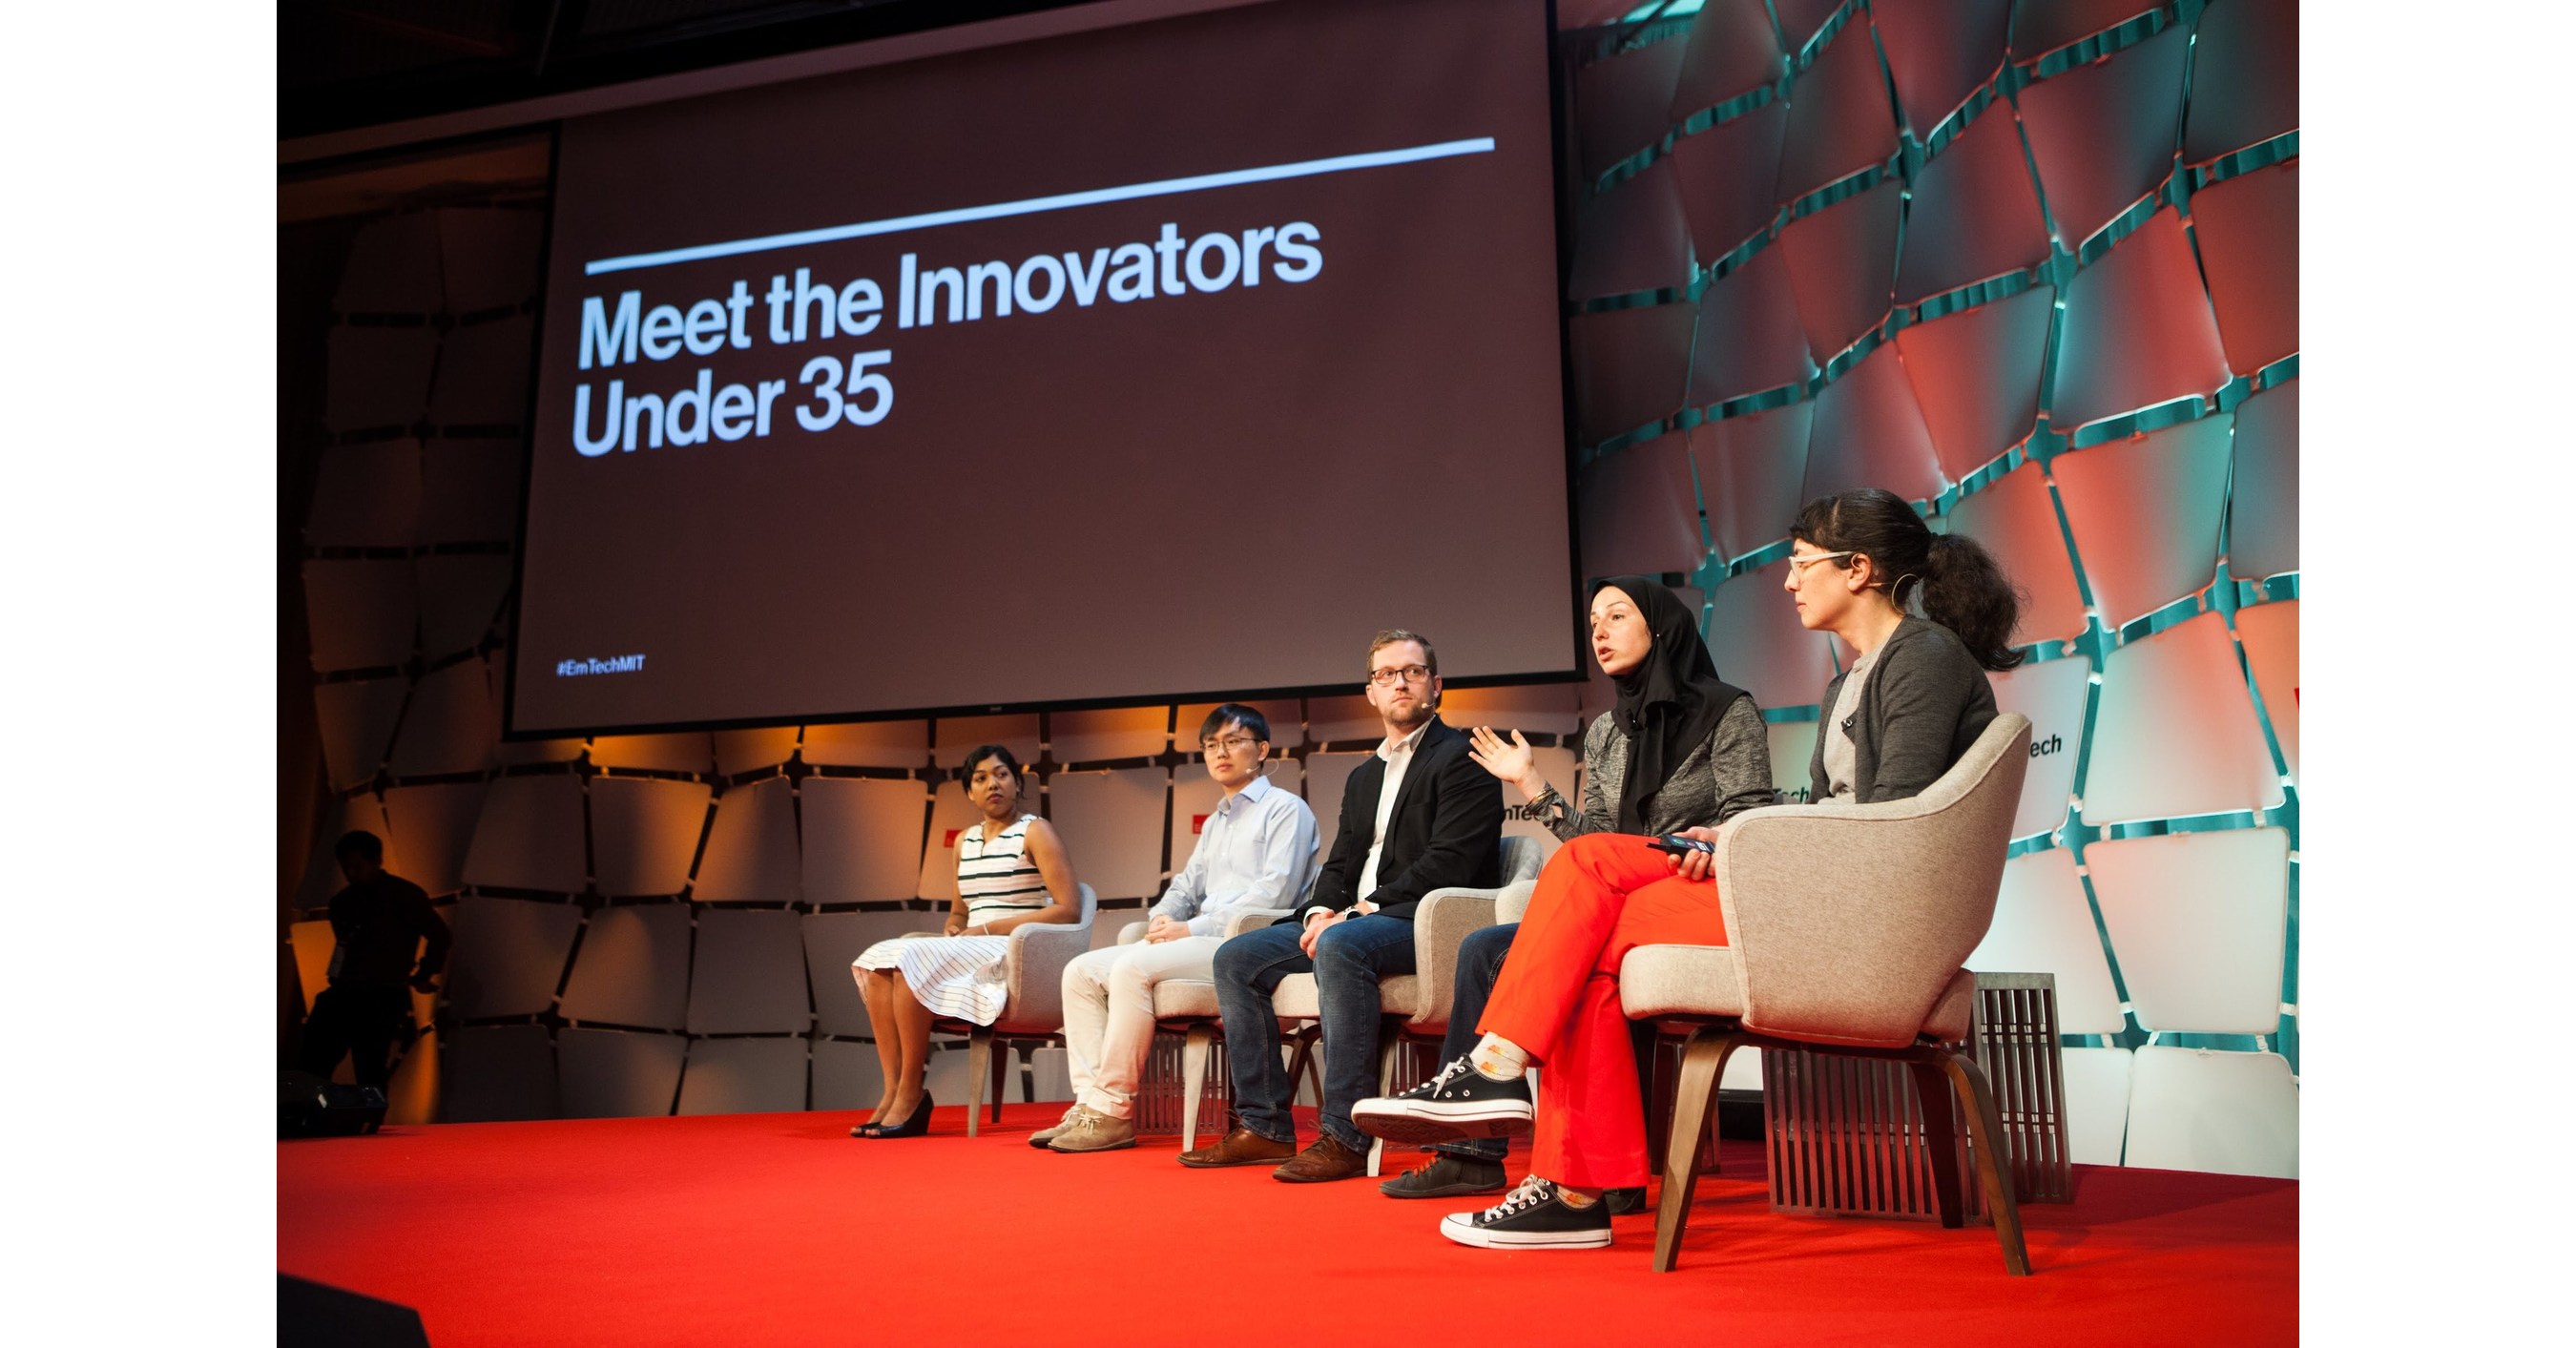 MIT Technology Review Announces Renowned Speakers and Key Themes for